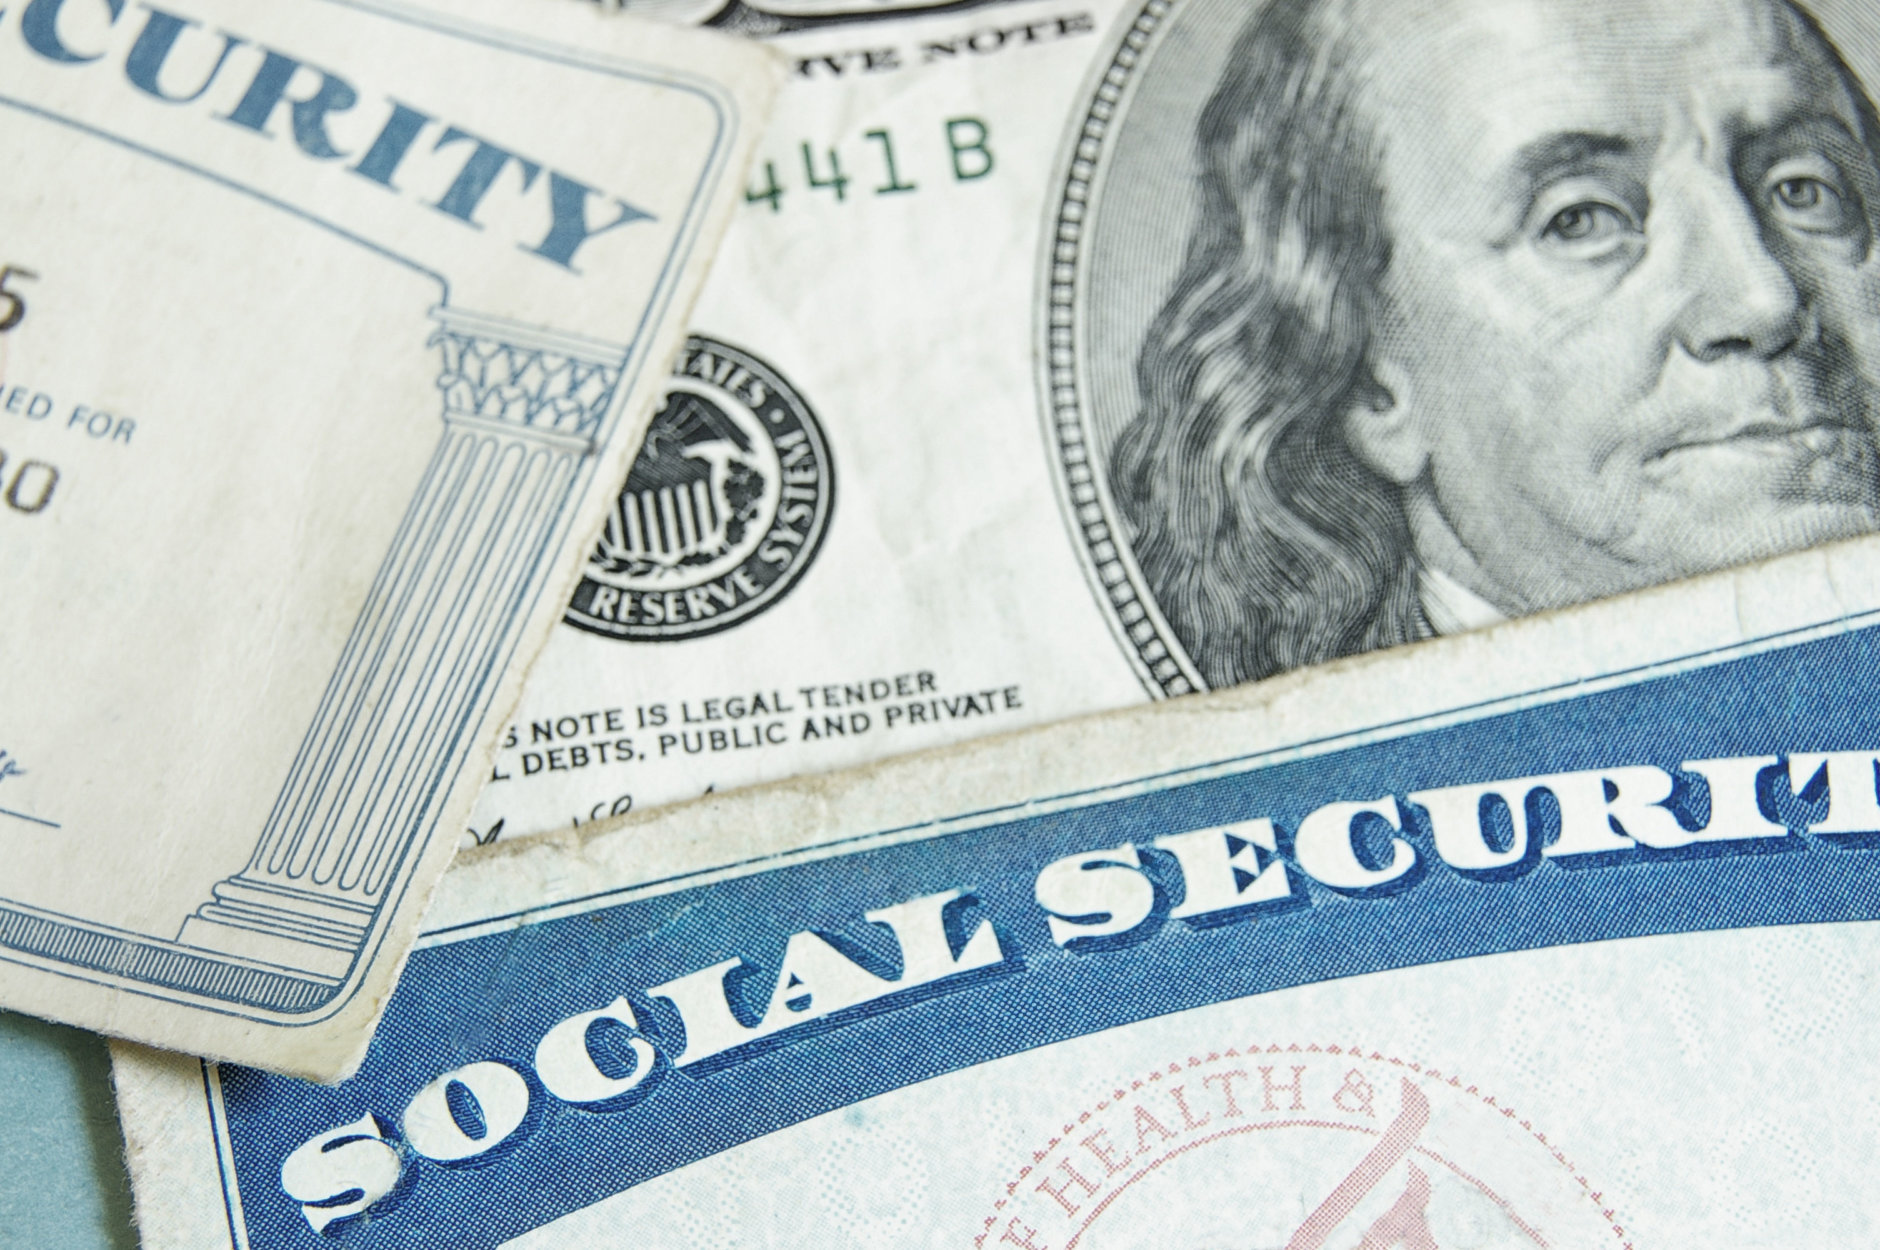 Social security cards and U.S. money - retirement concept. (Thinkstock)